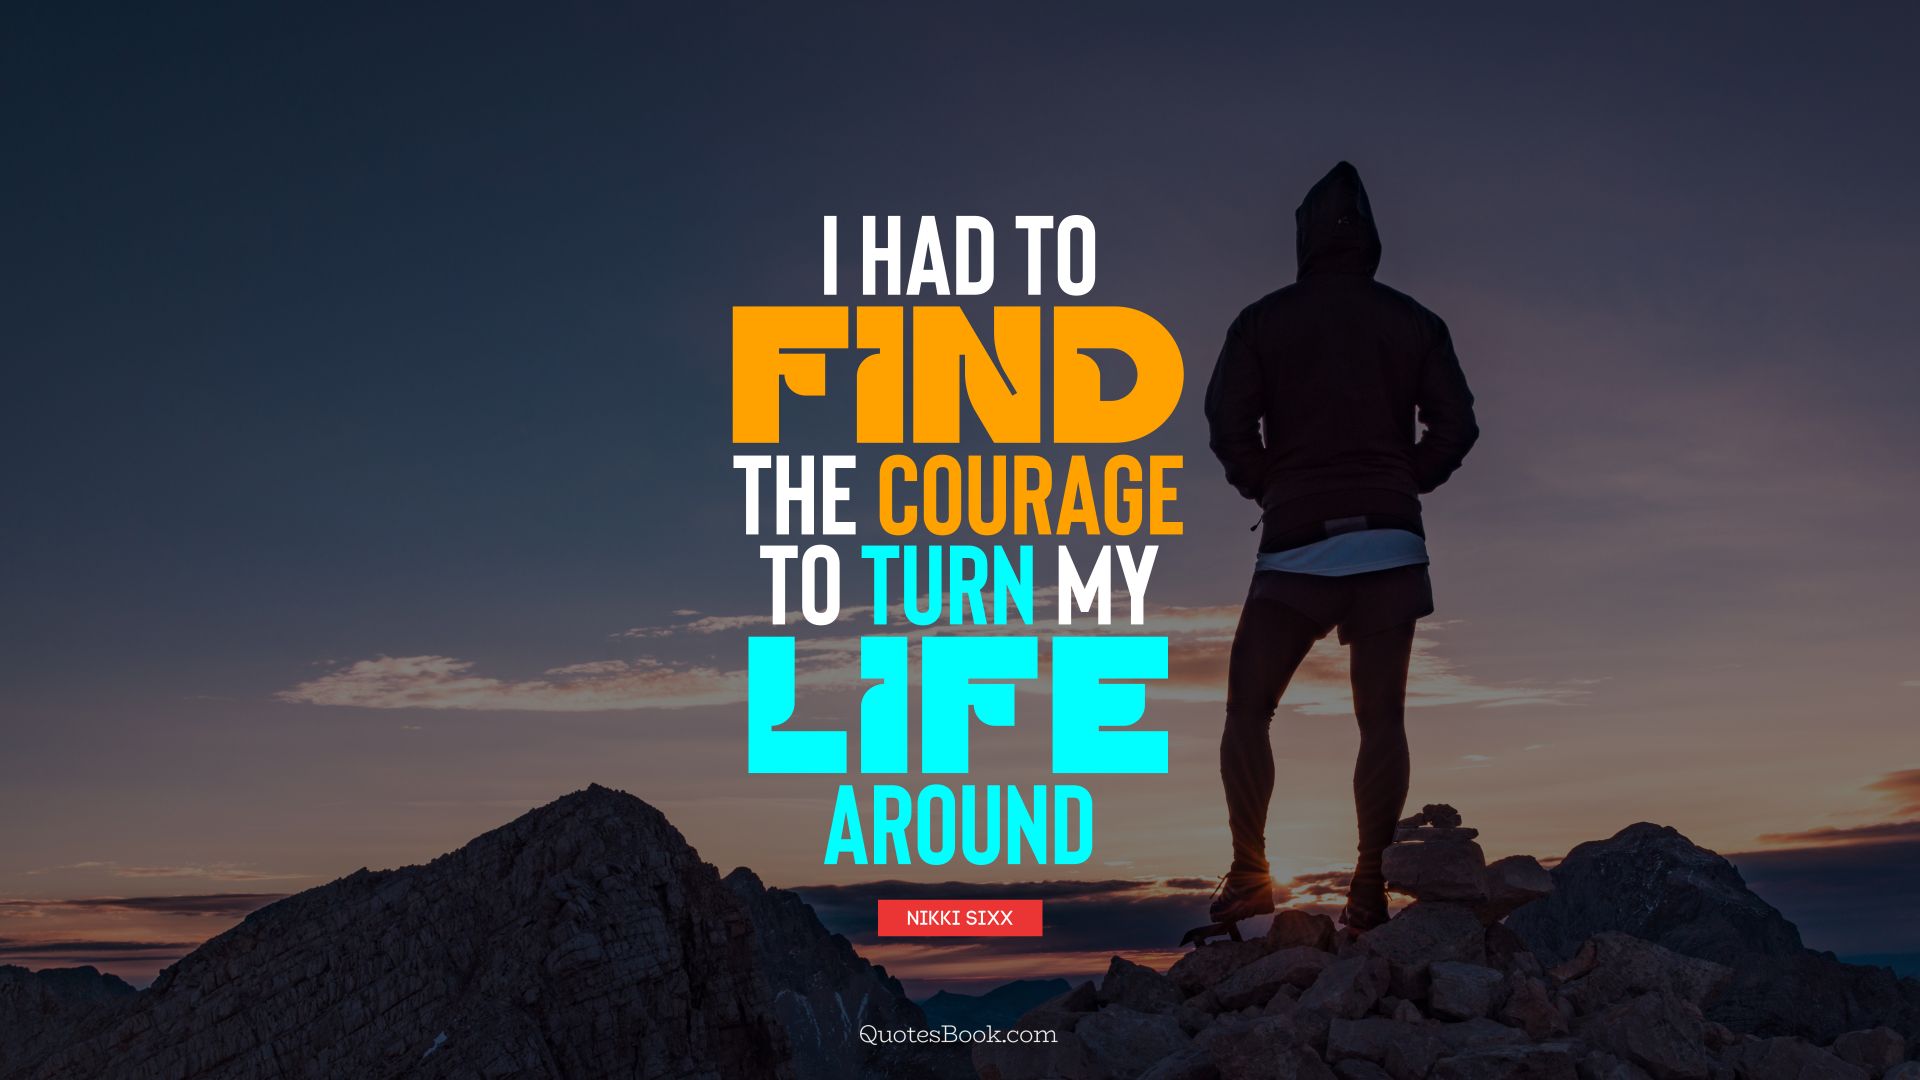 I had to find the courage to turn my life around. - Quote by Nikki Sixx